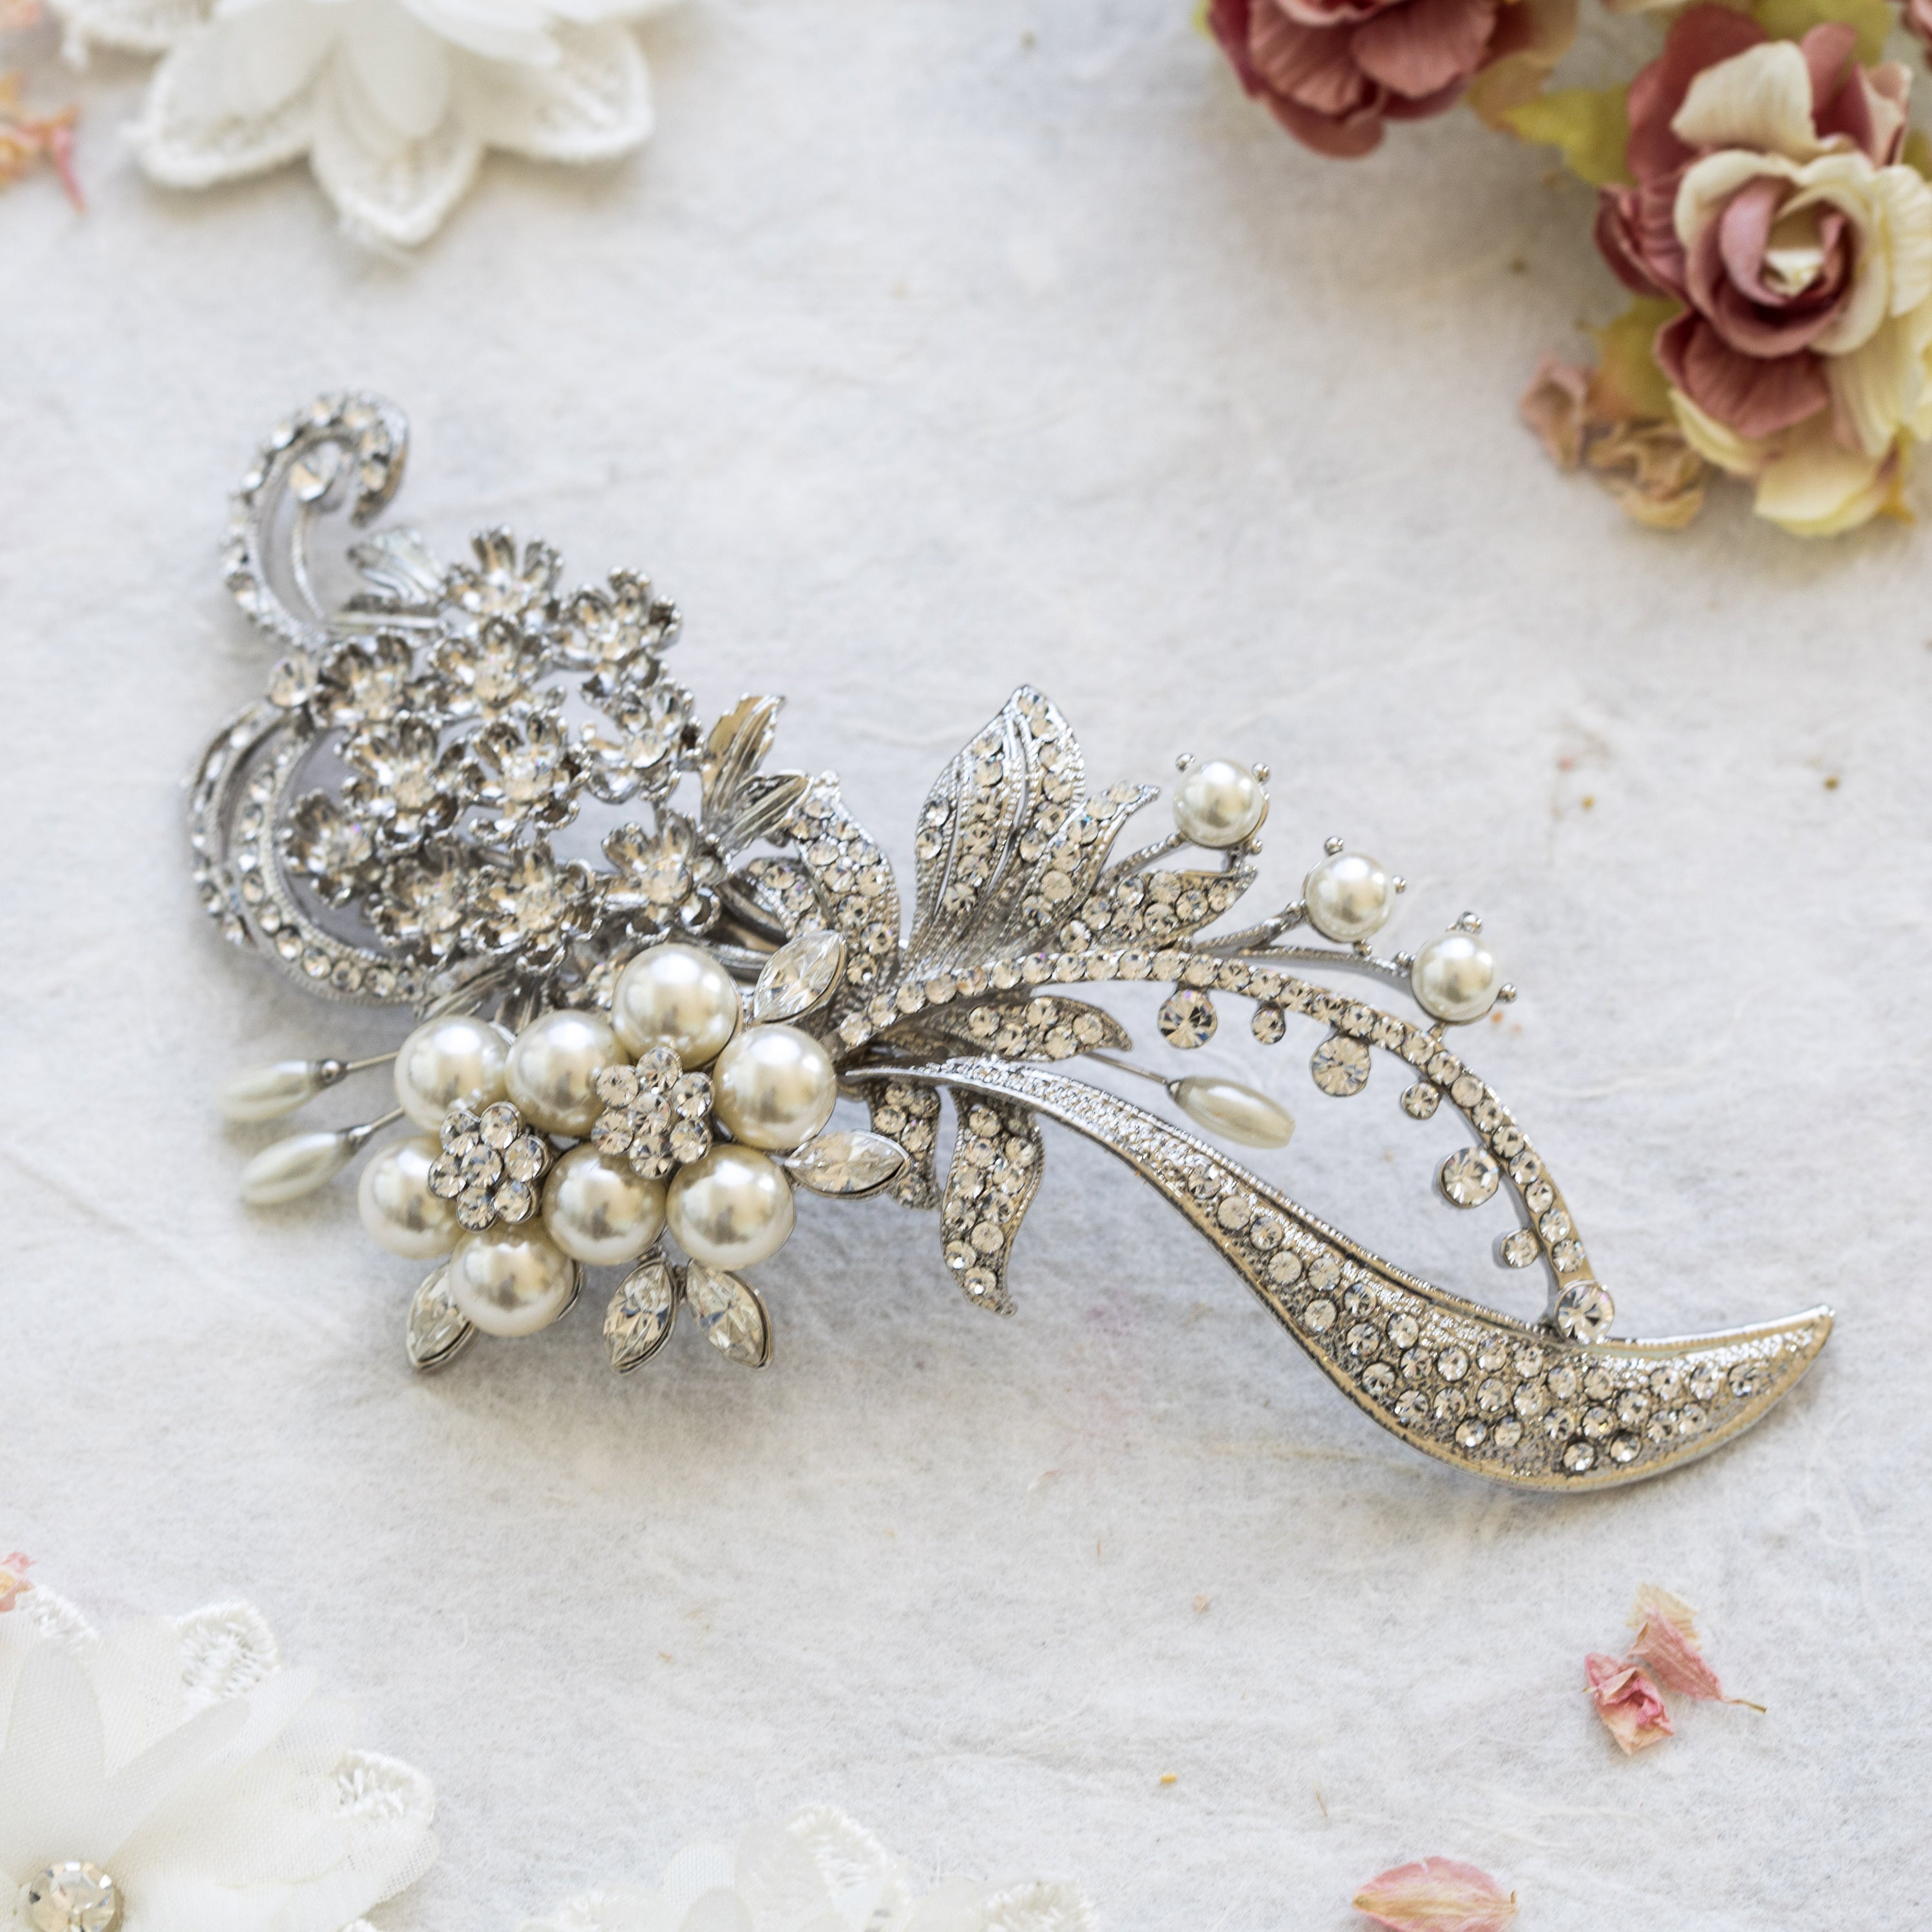 Honore silver crystal hairpiece